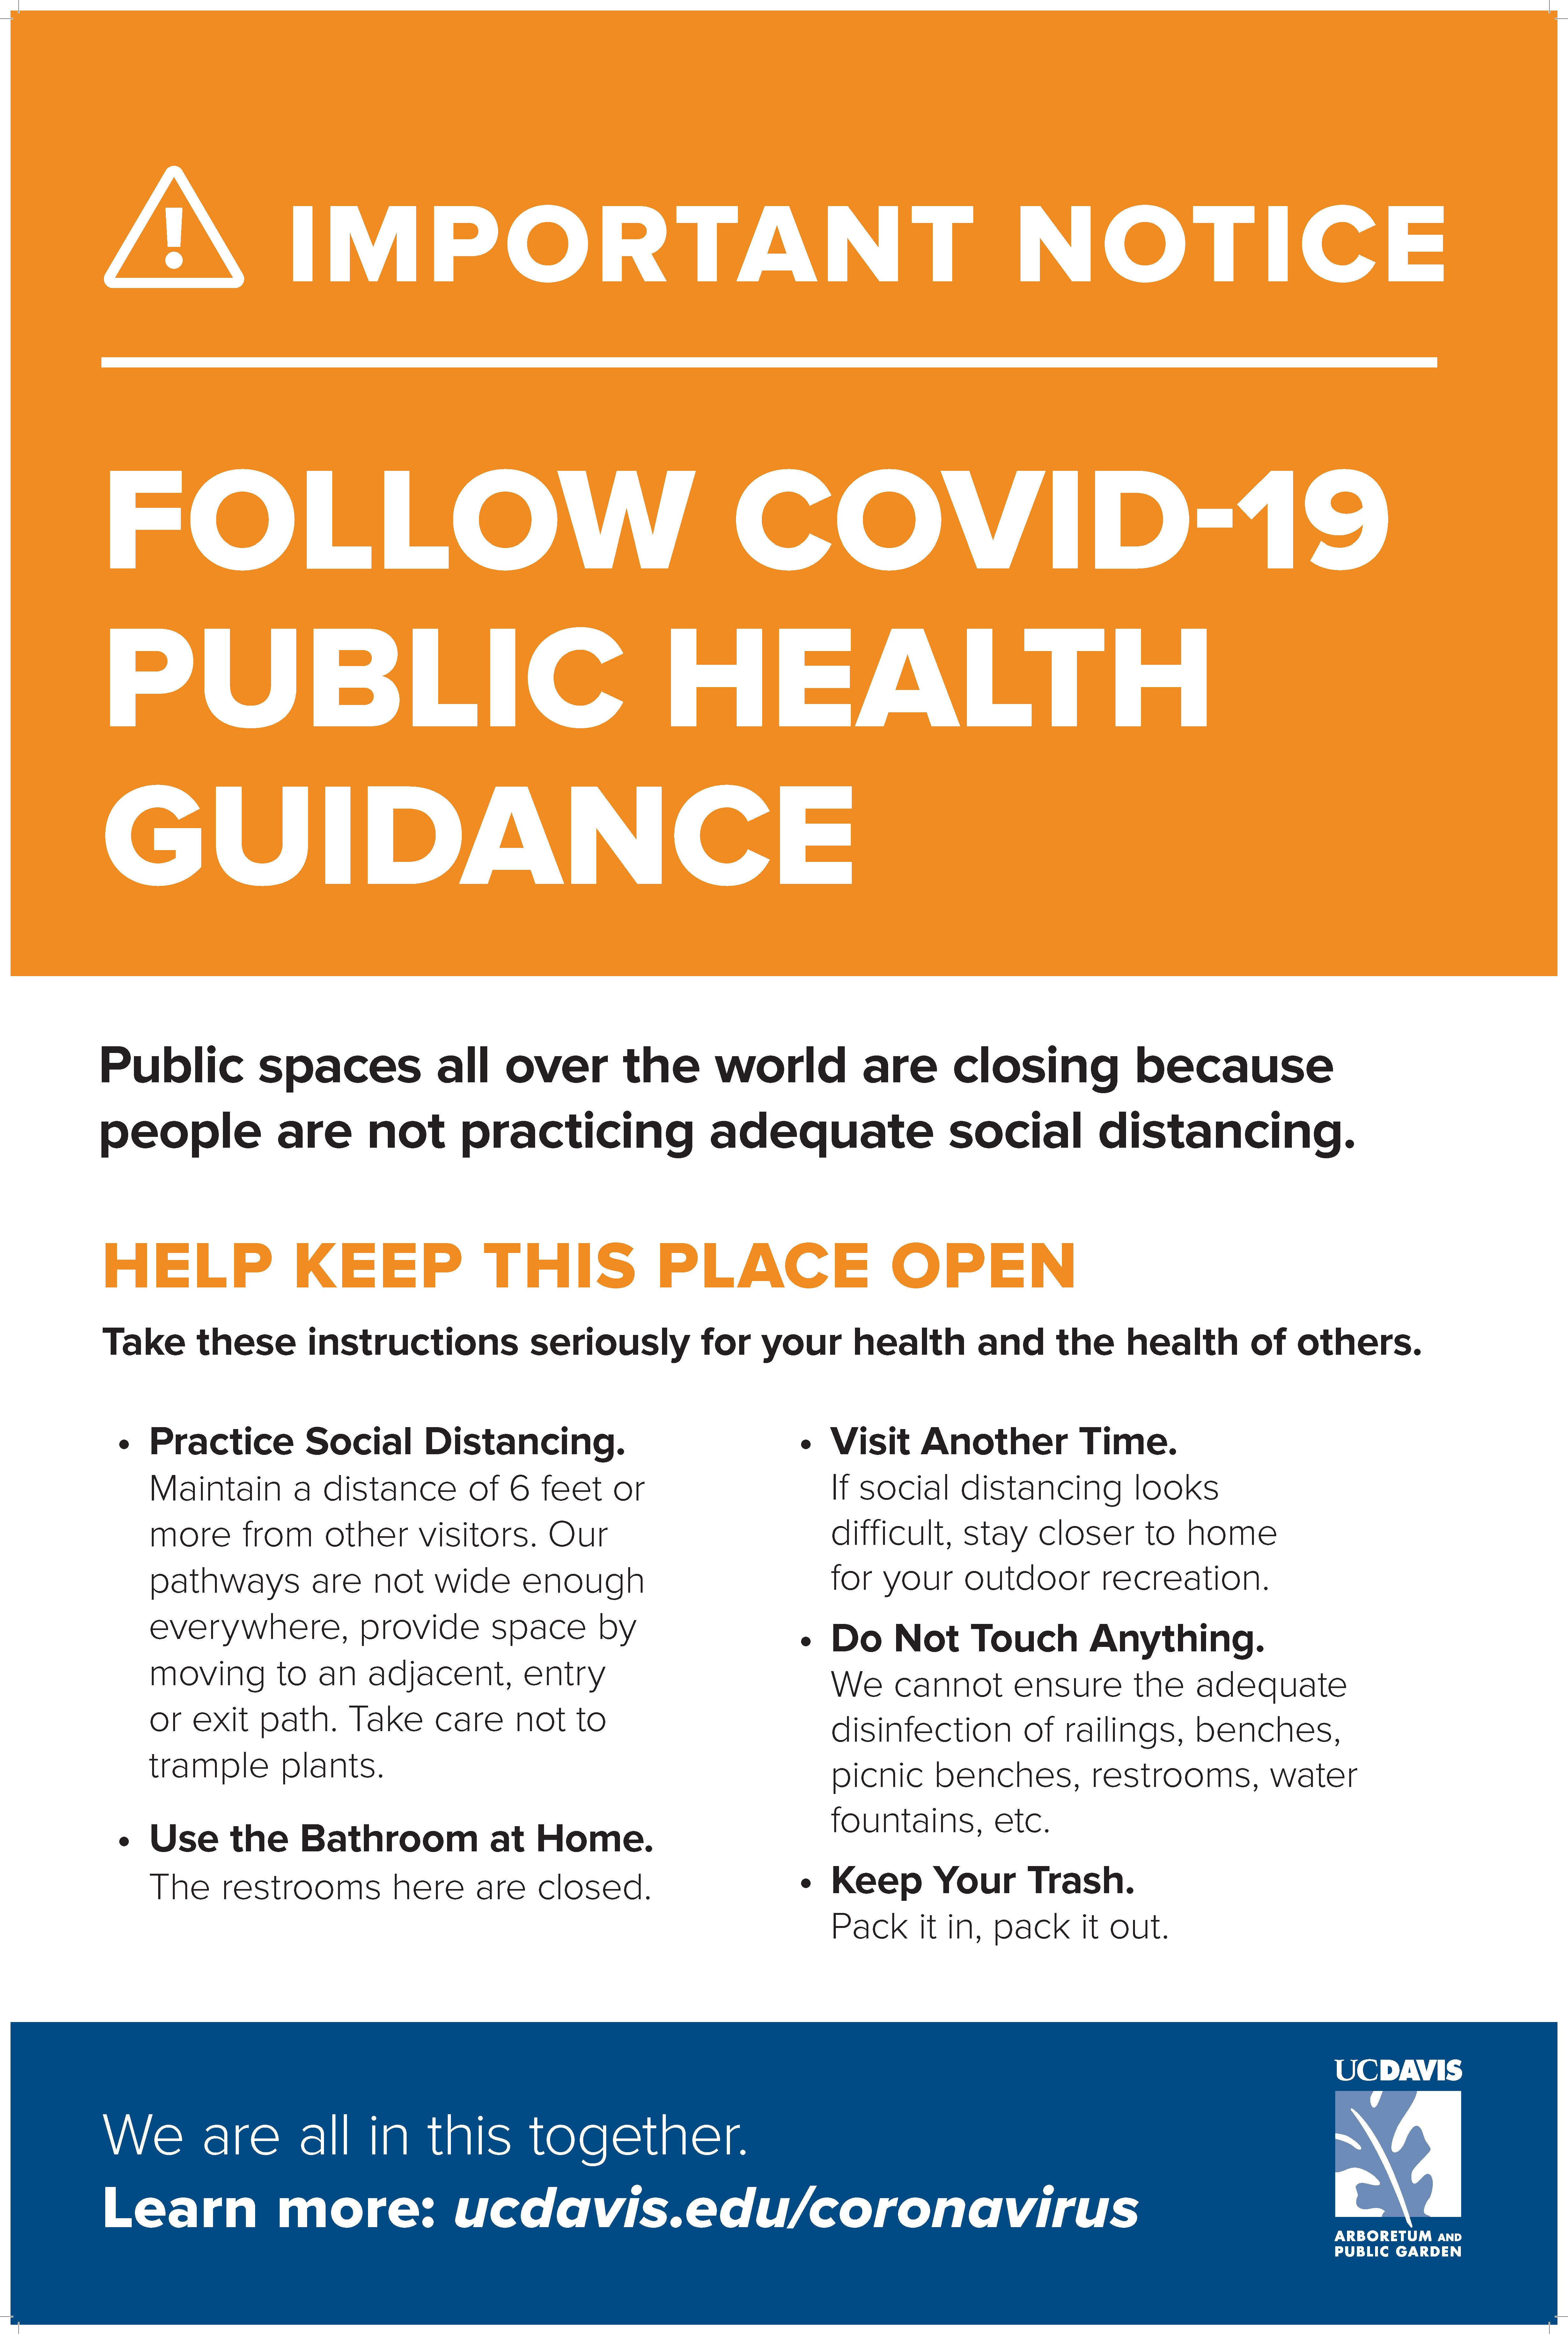 Poster showing how to visit outdoor spaces in accordance with public health guidelines.